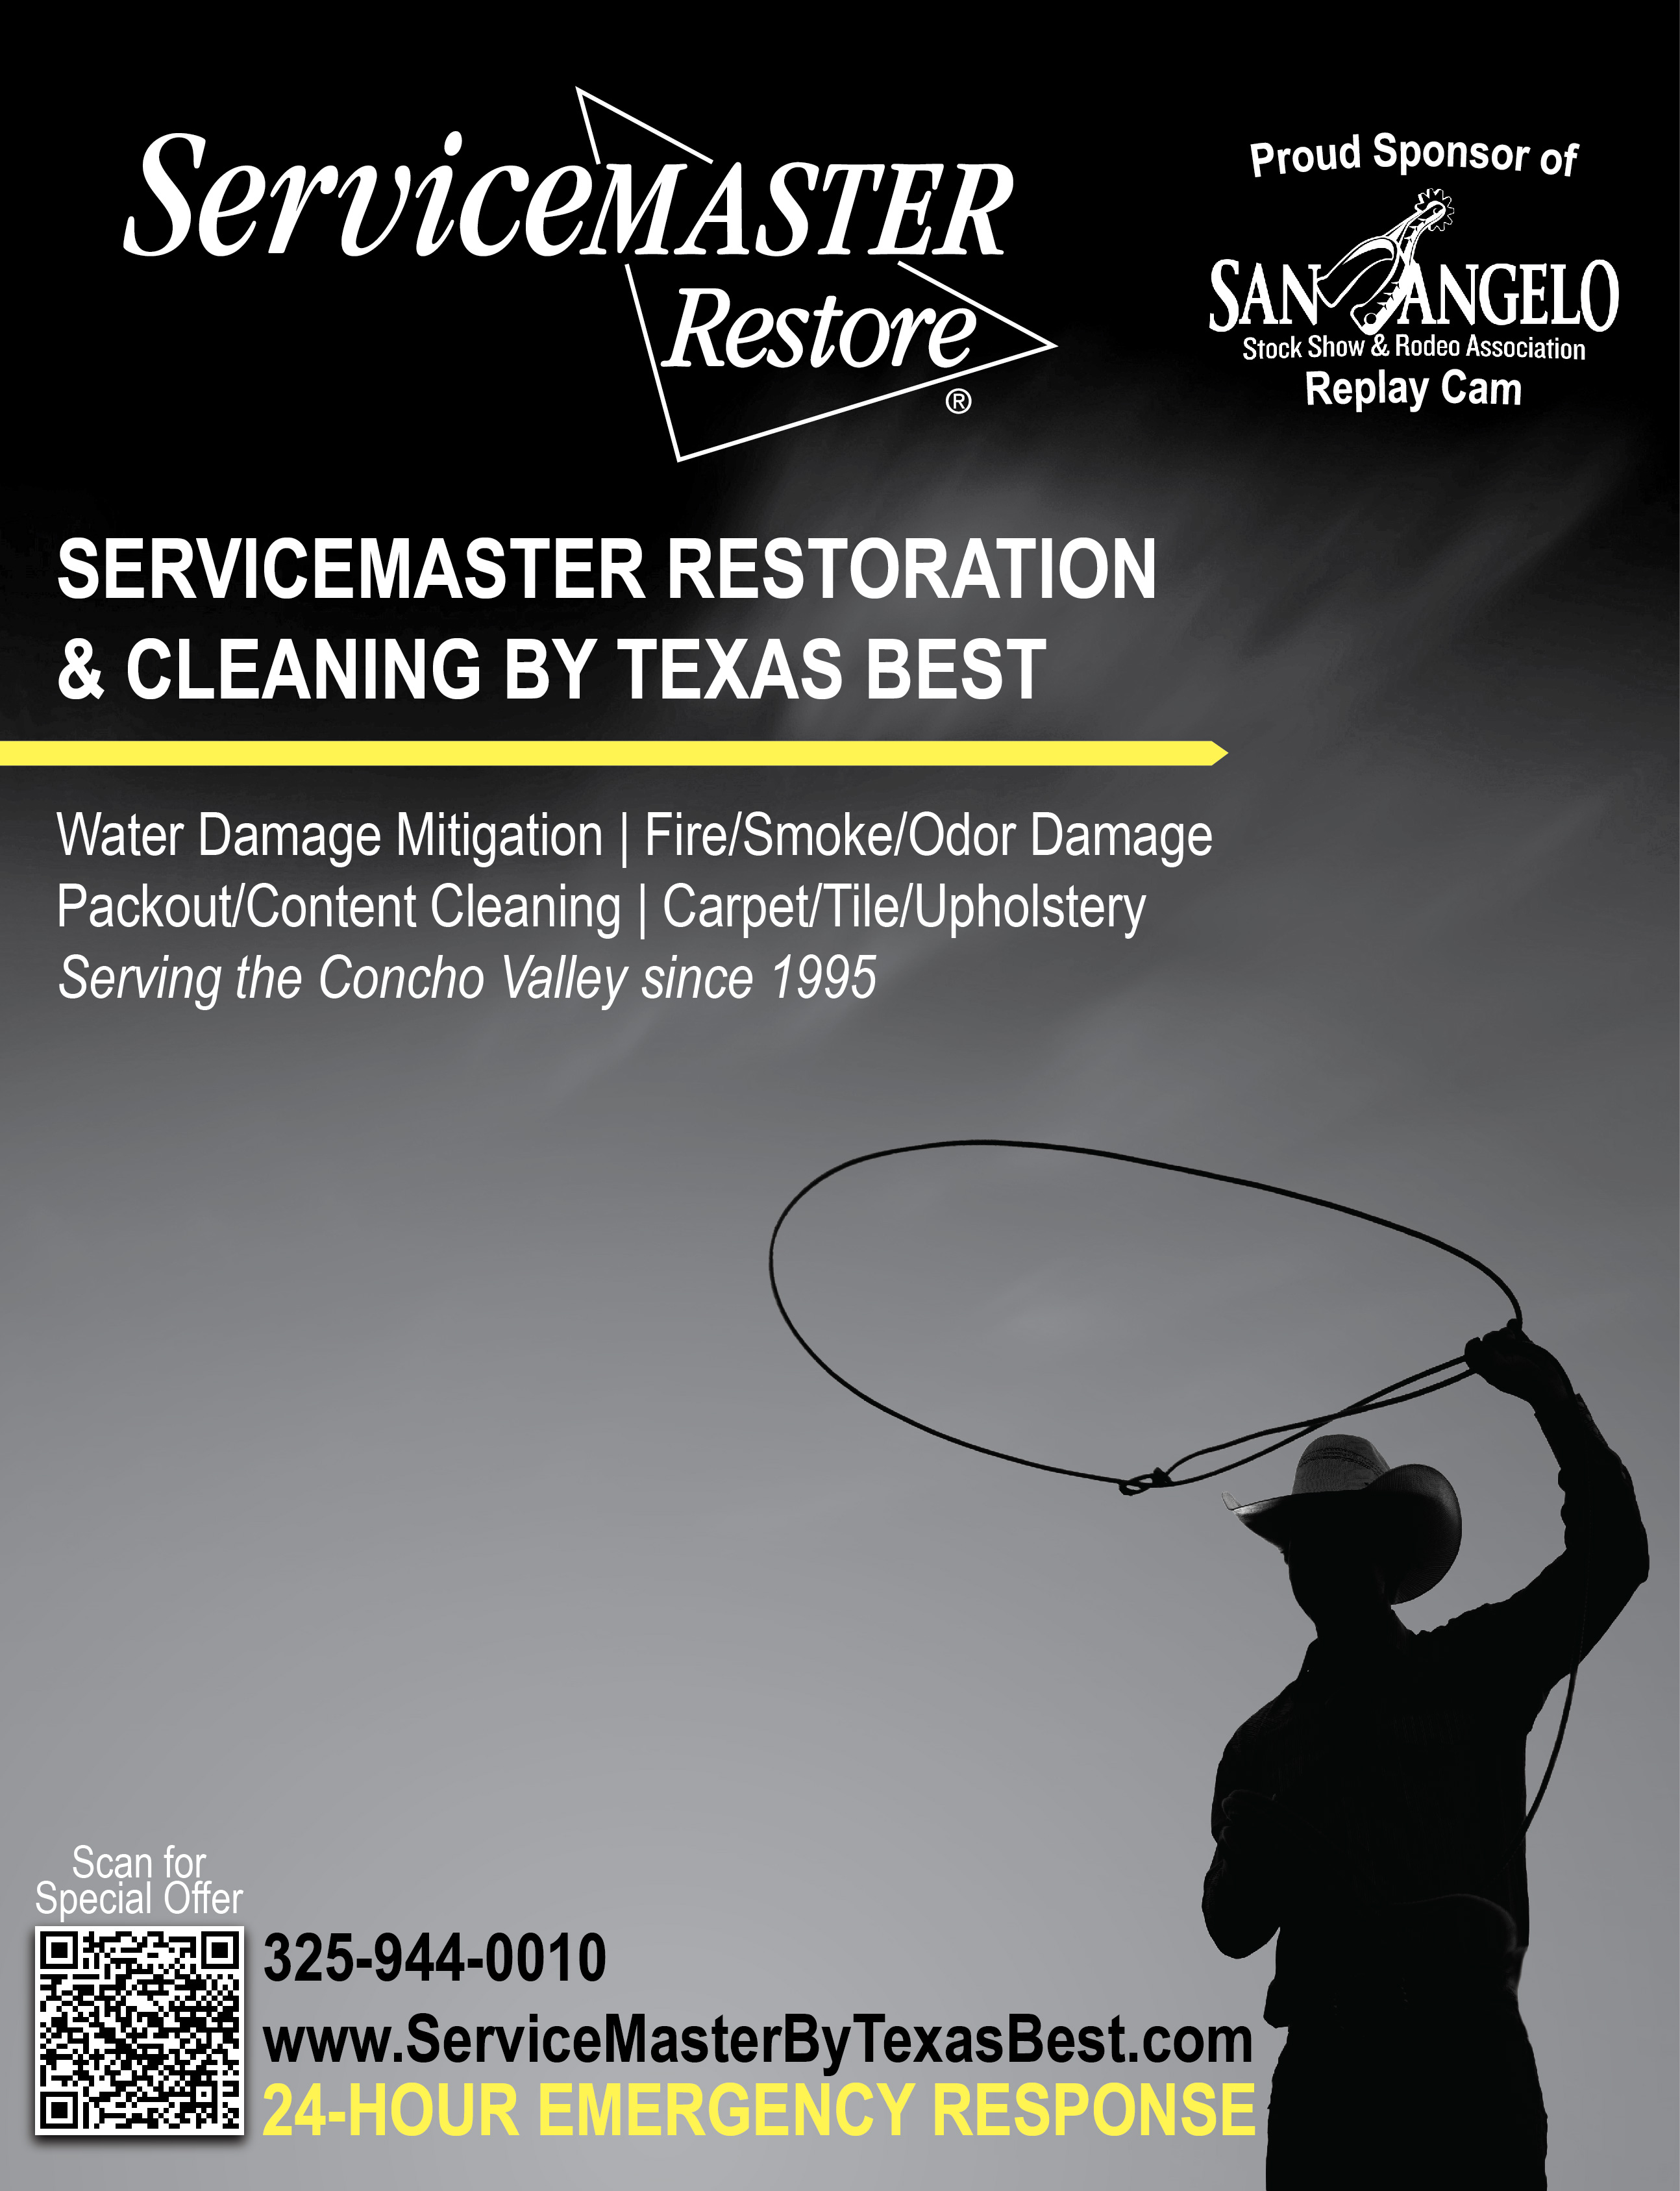 servicemaster restoration & cleaning by texas best flyer rodeo ad